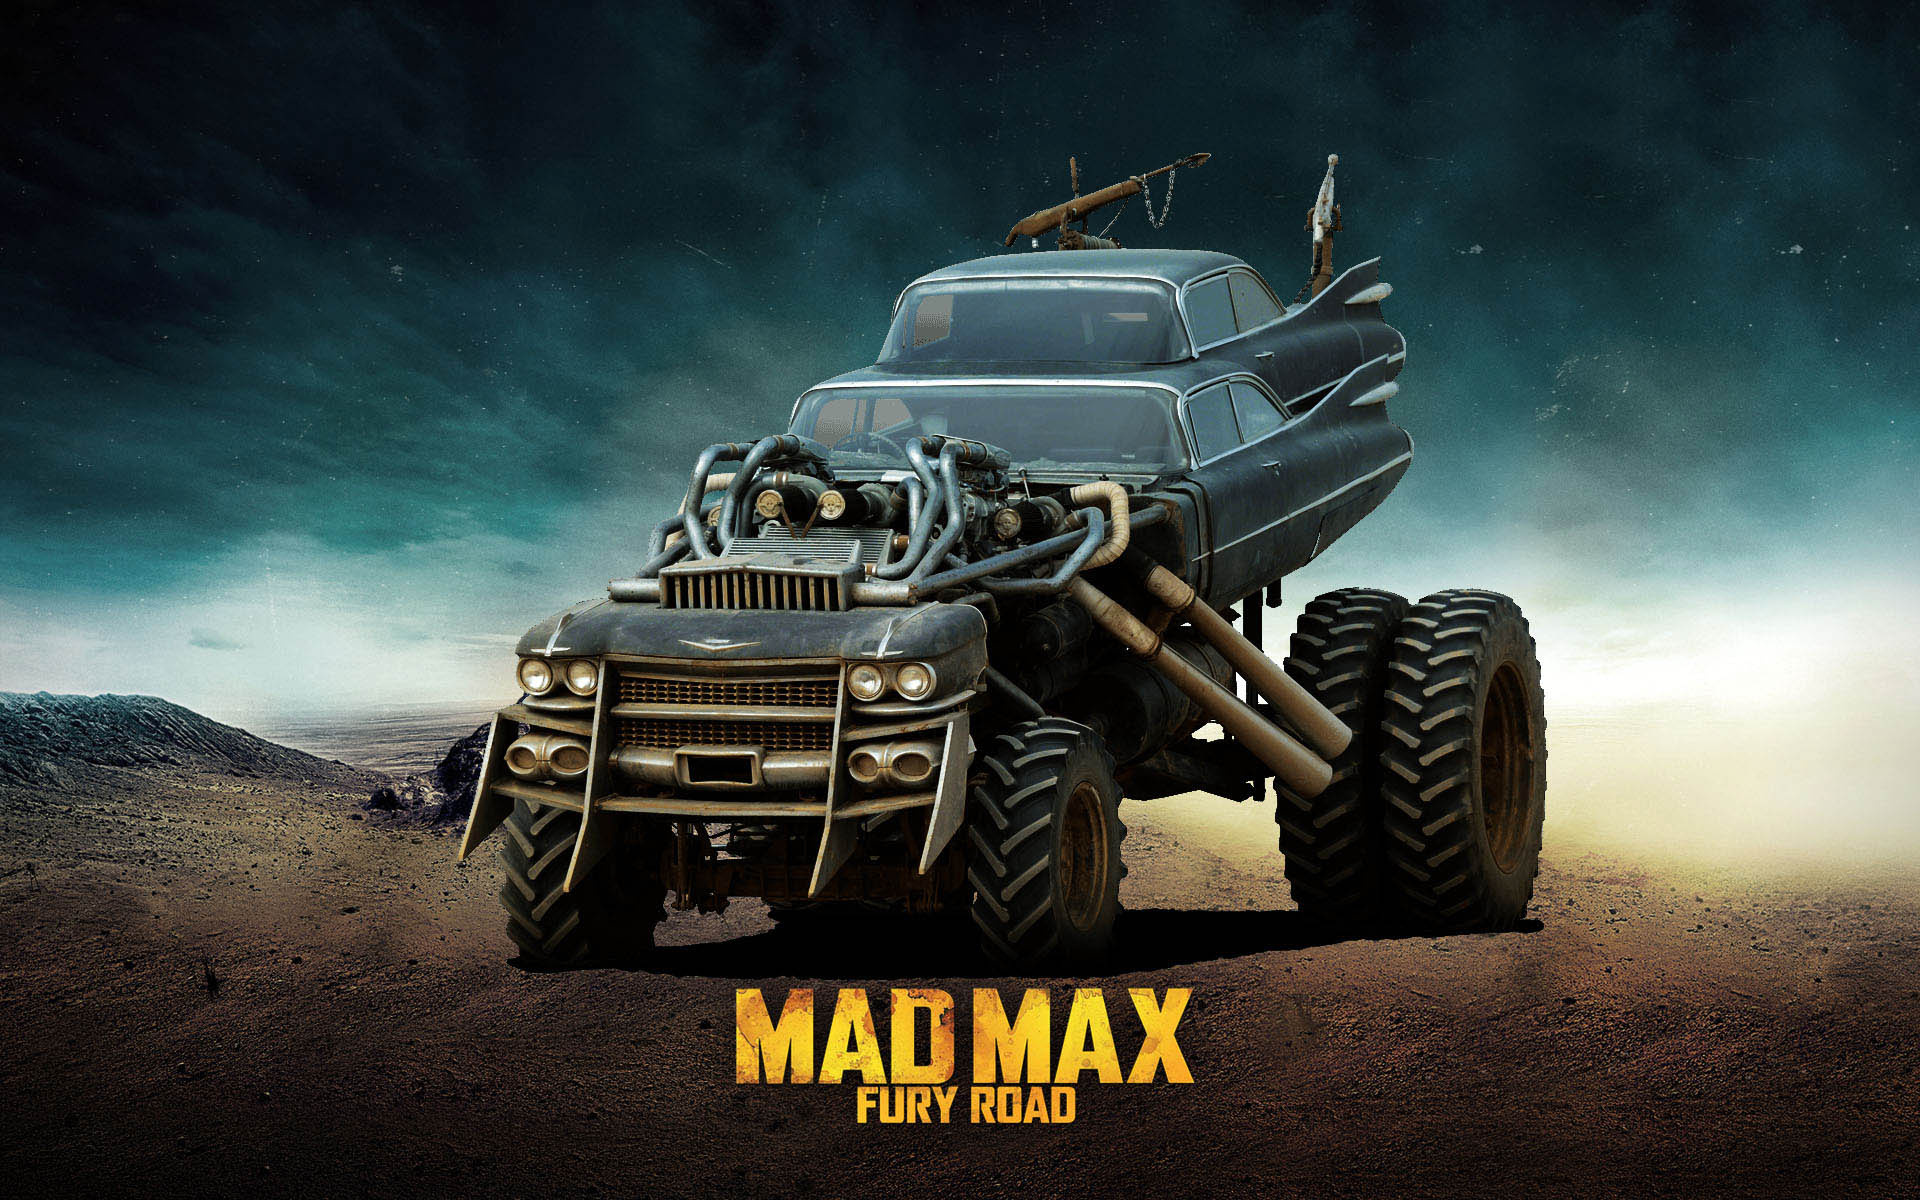 Mad Max: The Gigahorse, The custom vehicle driven by Immortan Joe, built on a custom chassis, a body made of two 1959 Cadillac Coupe de Villes. 1920x1200 HD Background.